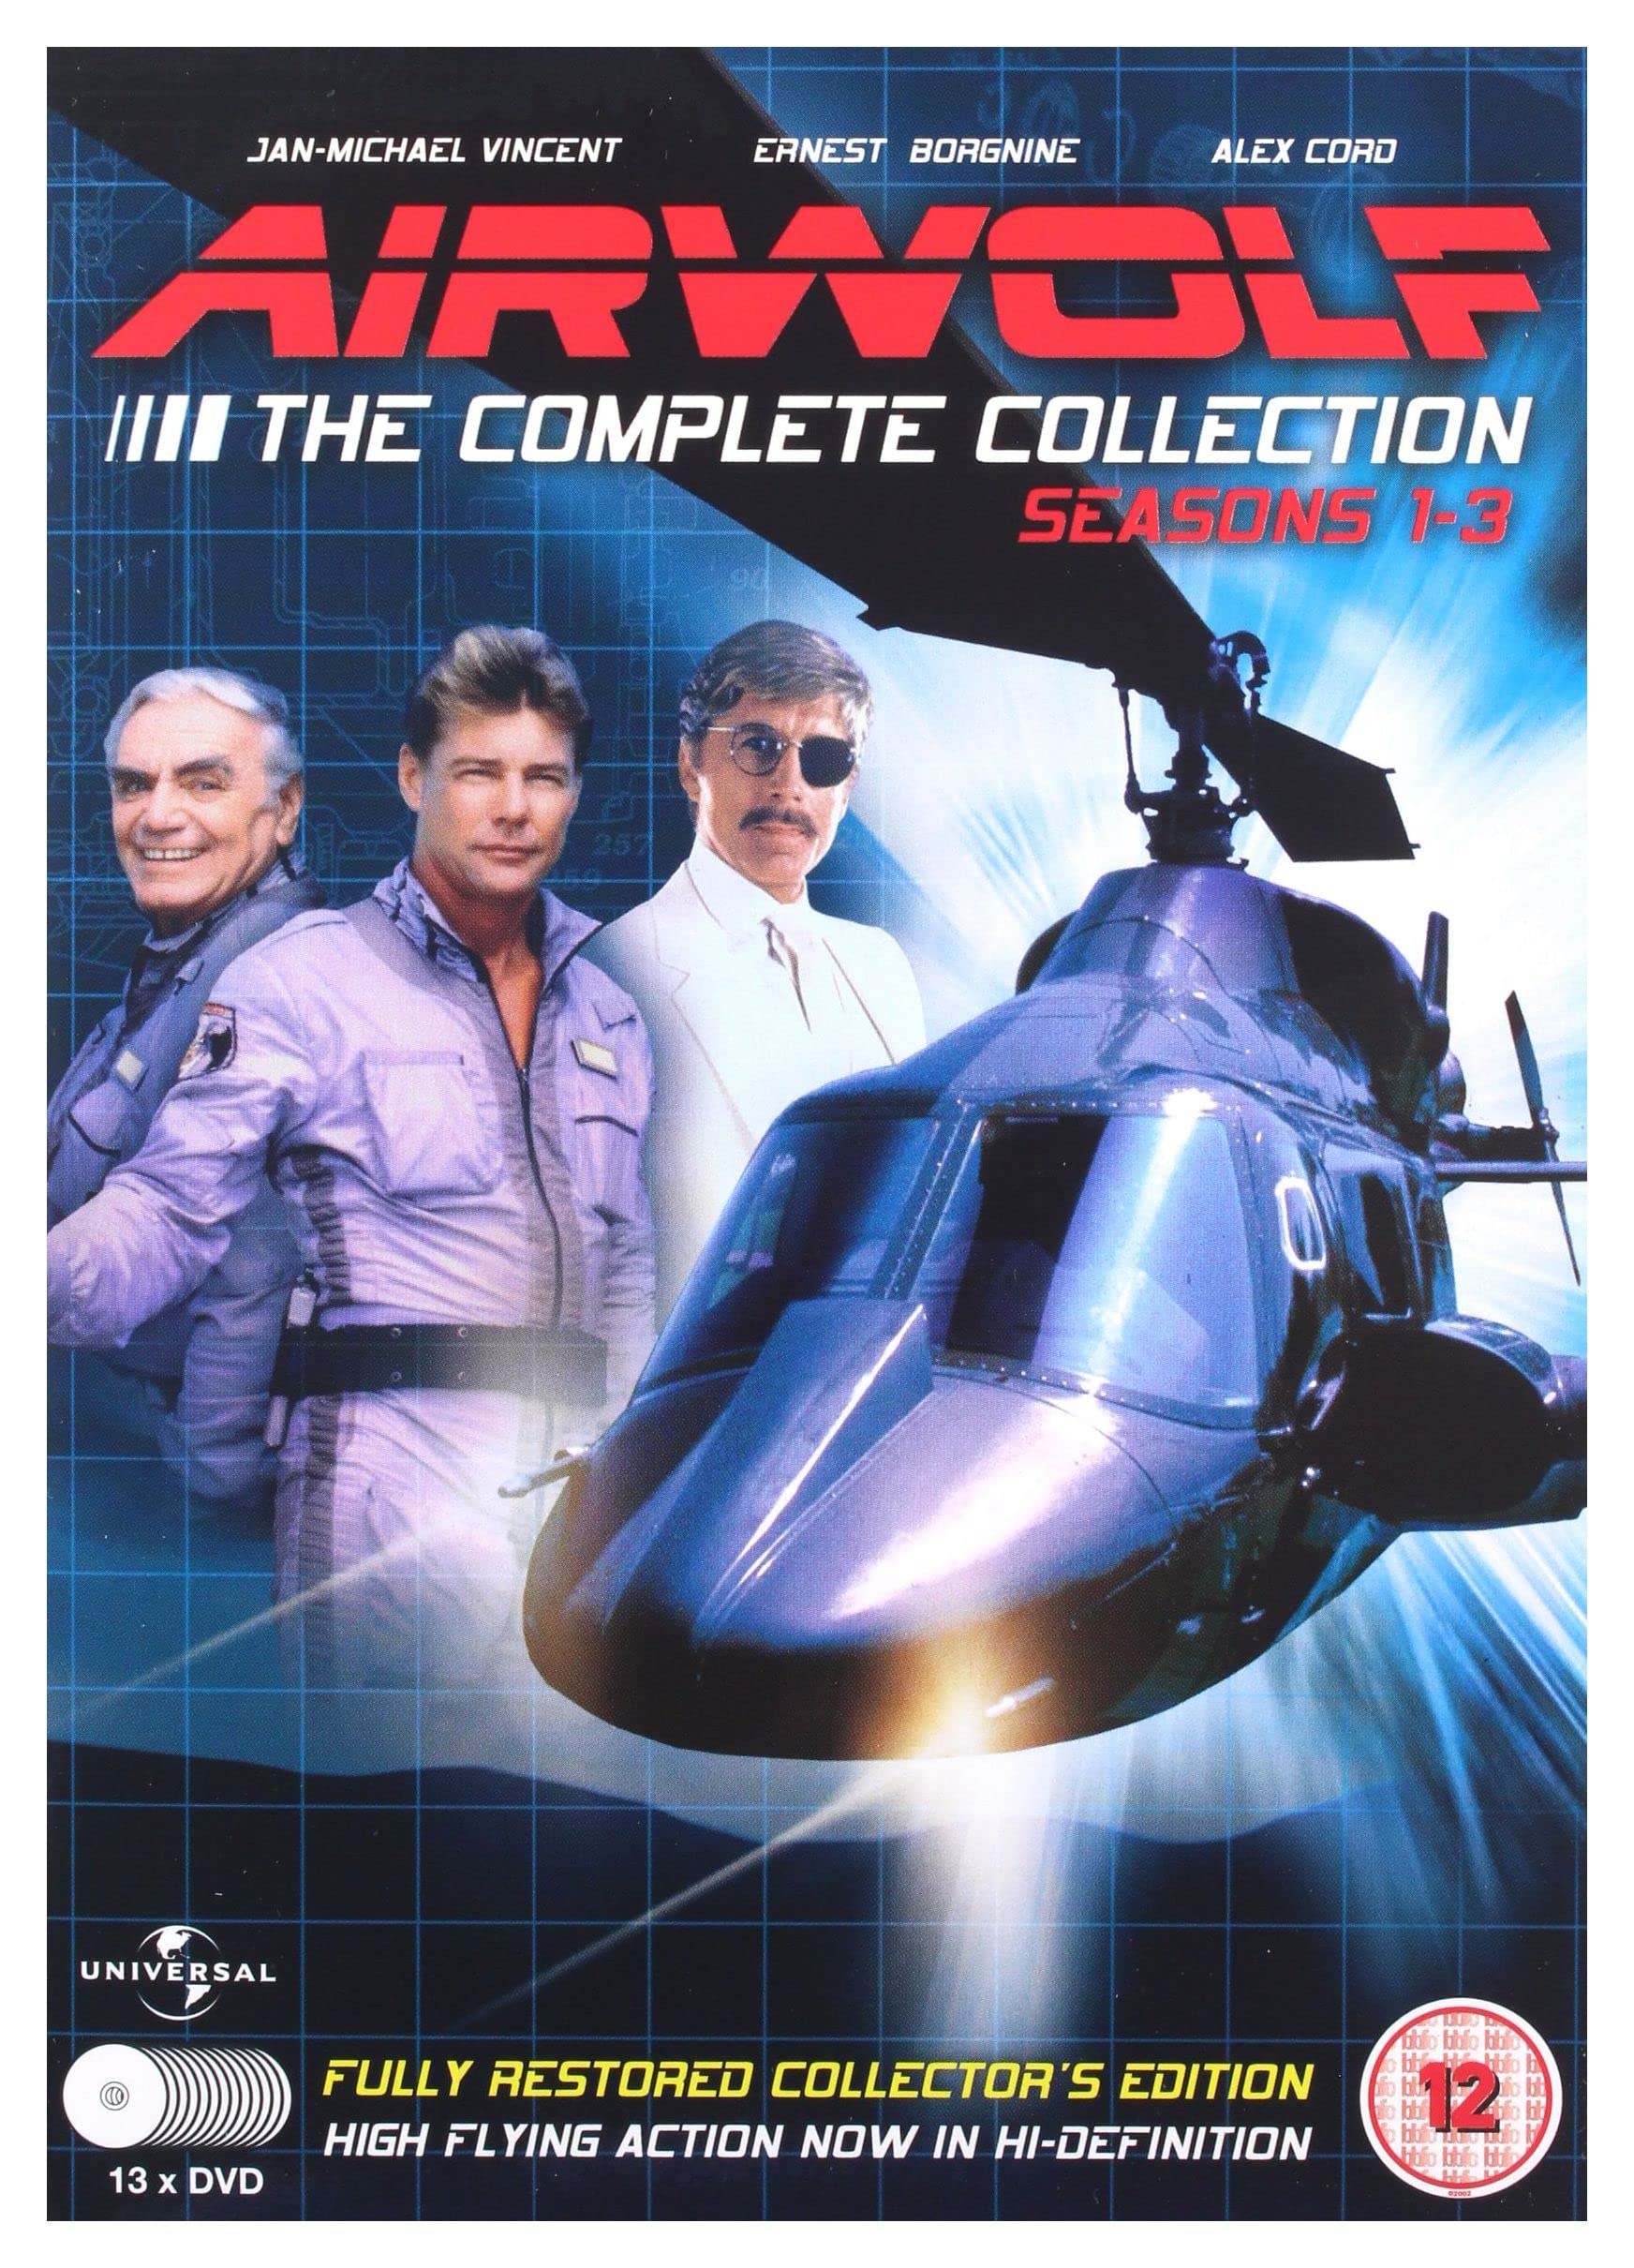 Airwolf - The Complete Collection:Seasons 1-3 - 13 DVD Set [DVD] [UK Import]